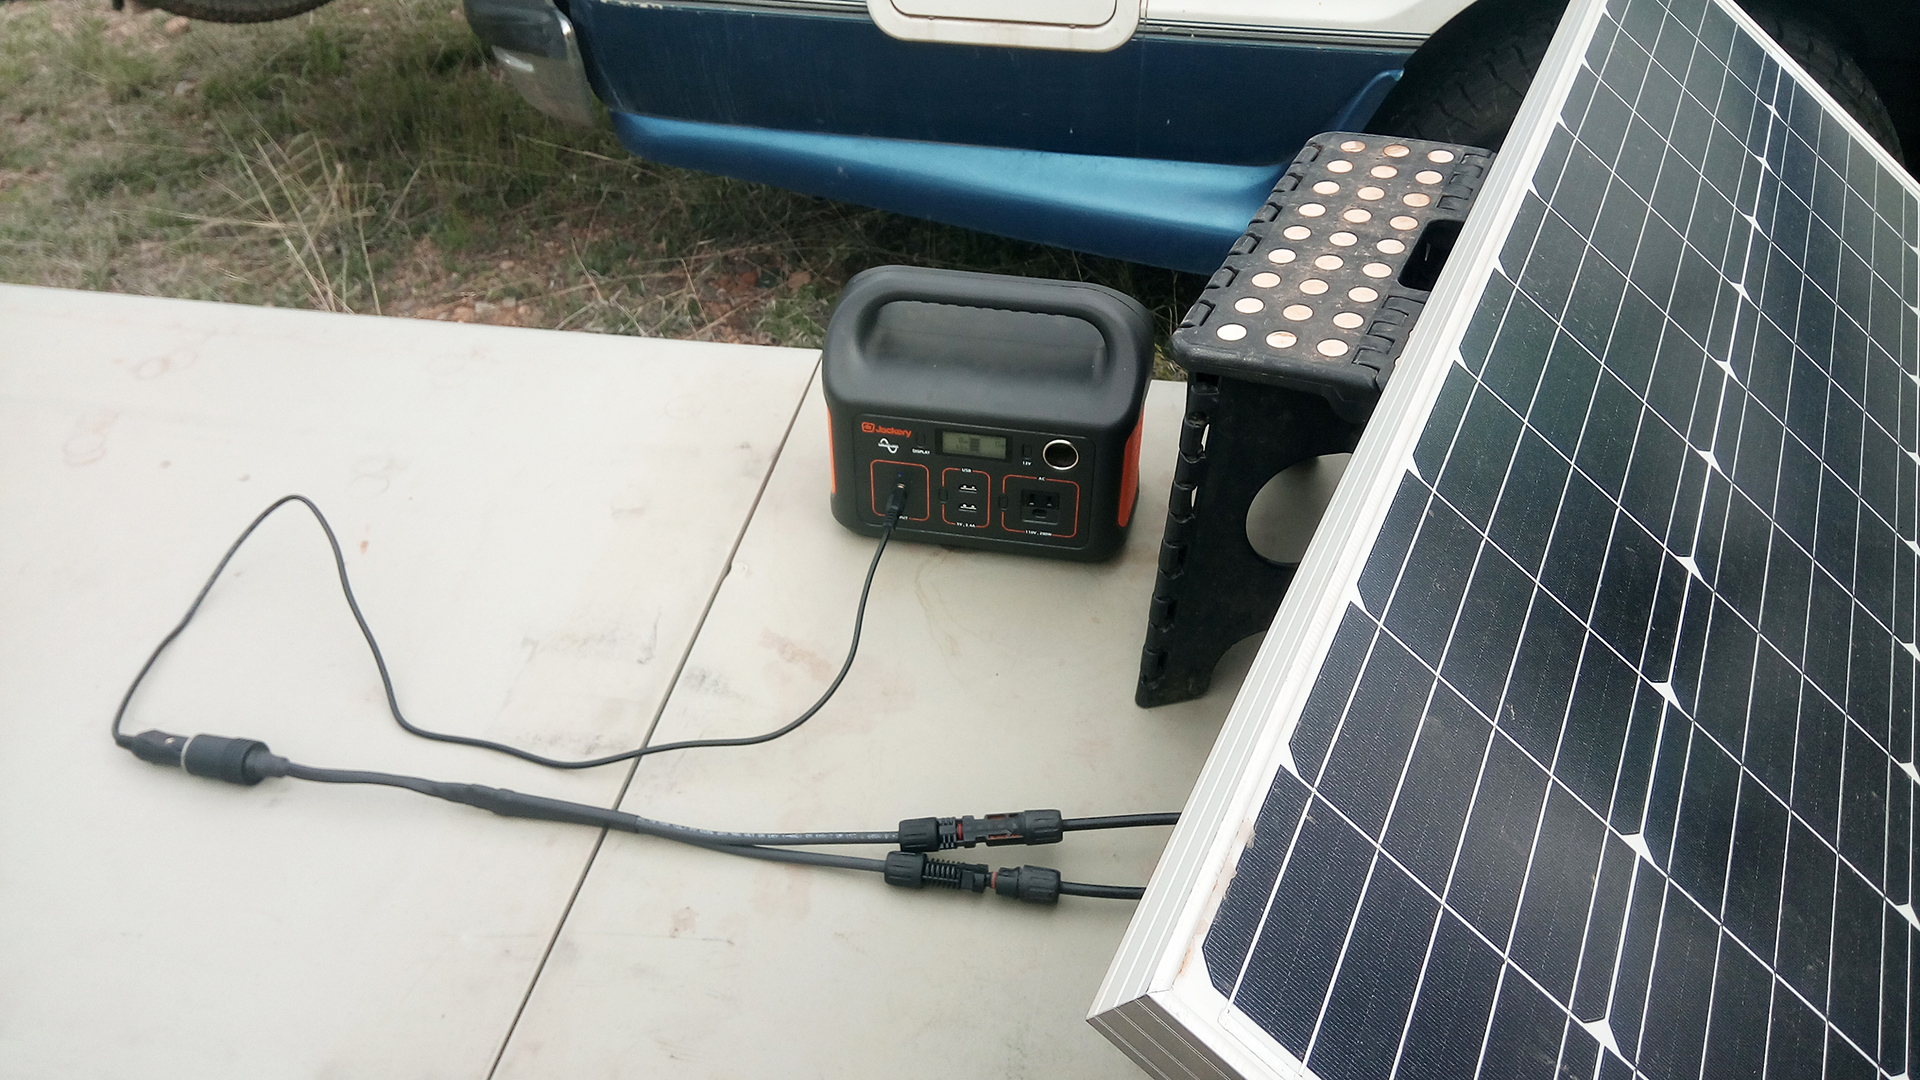 “Any Solar Panel” Adapter For Solar Chargeable Power Stations 12vdc Socket To MC4 [SOLD OUT